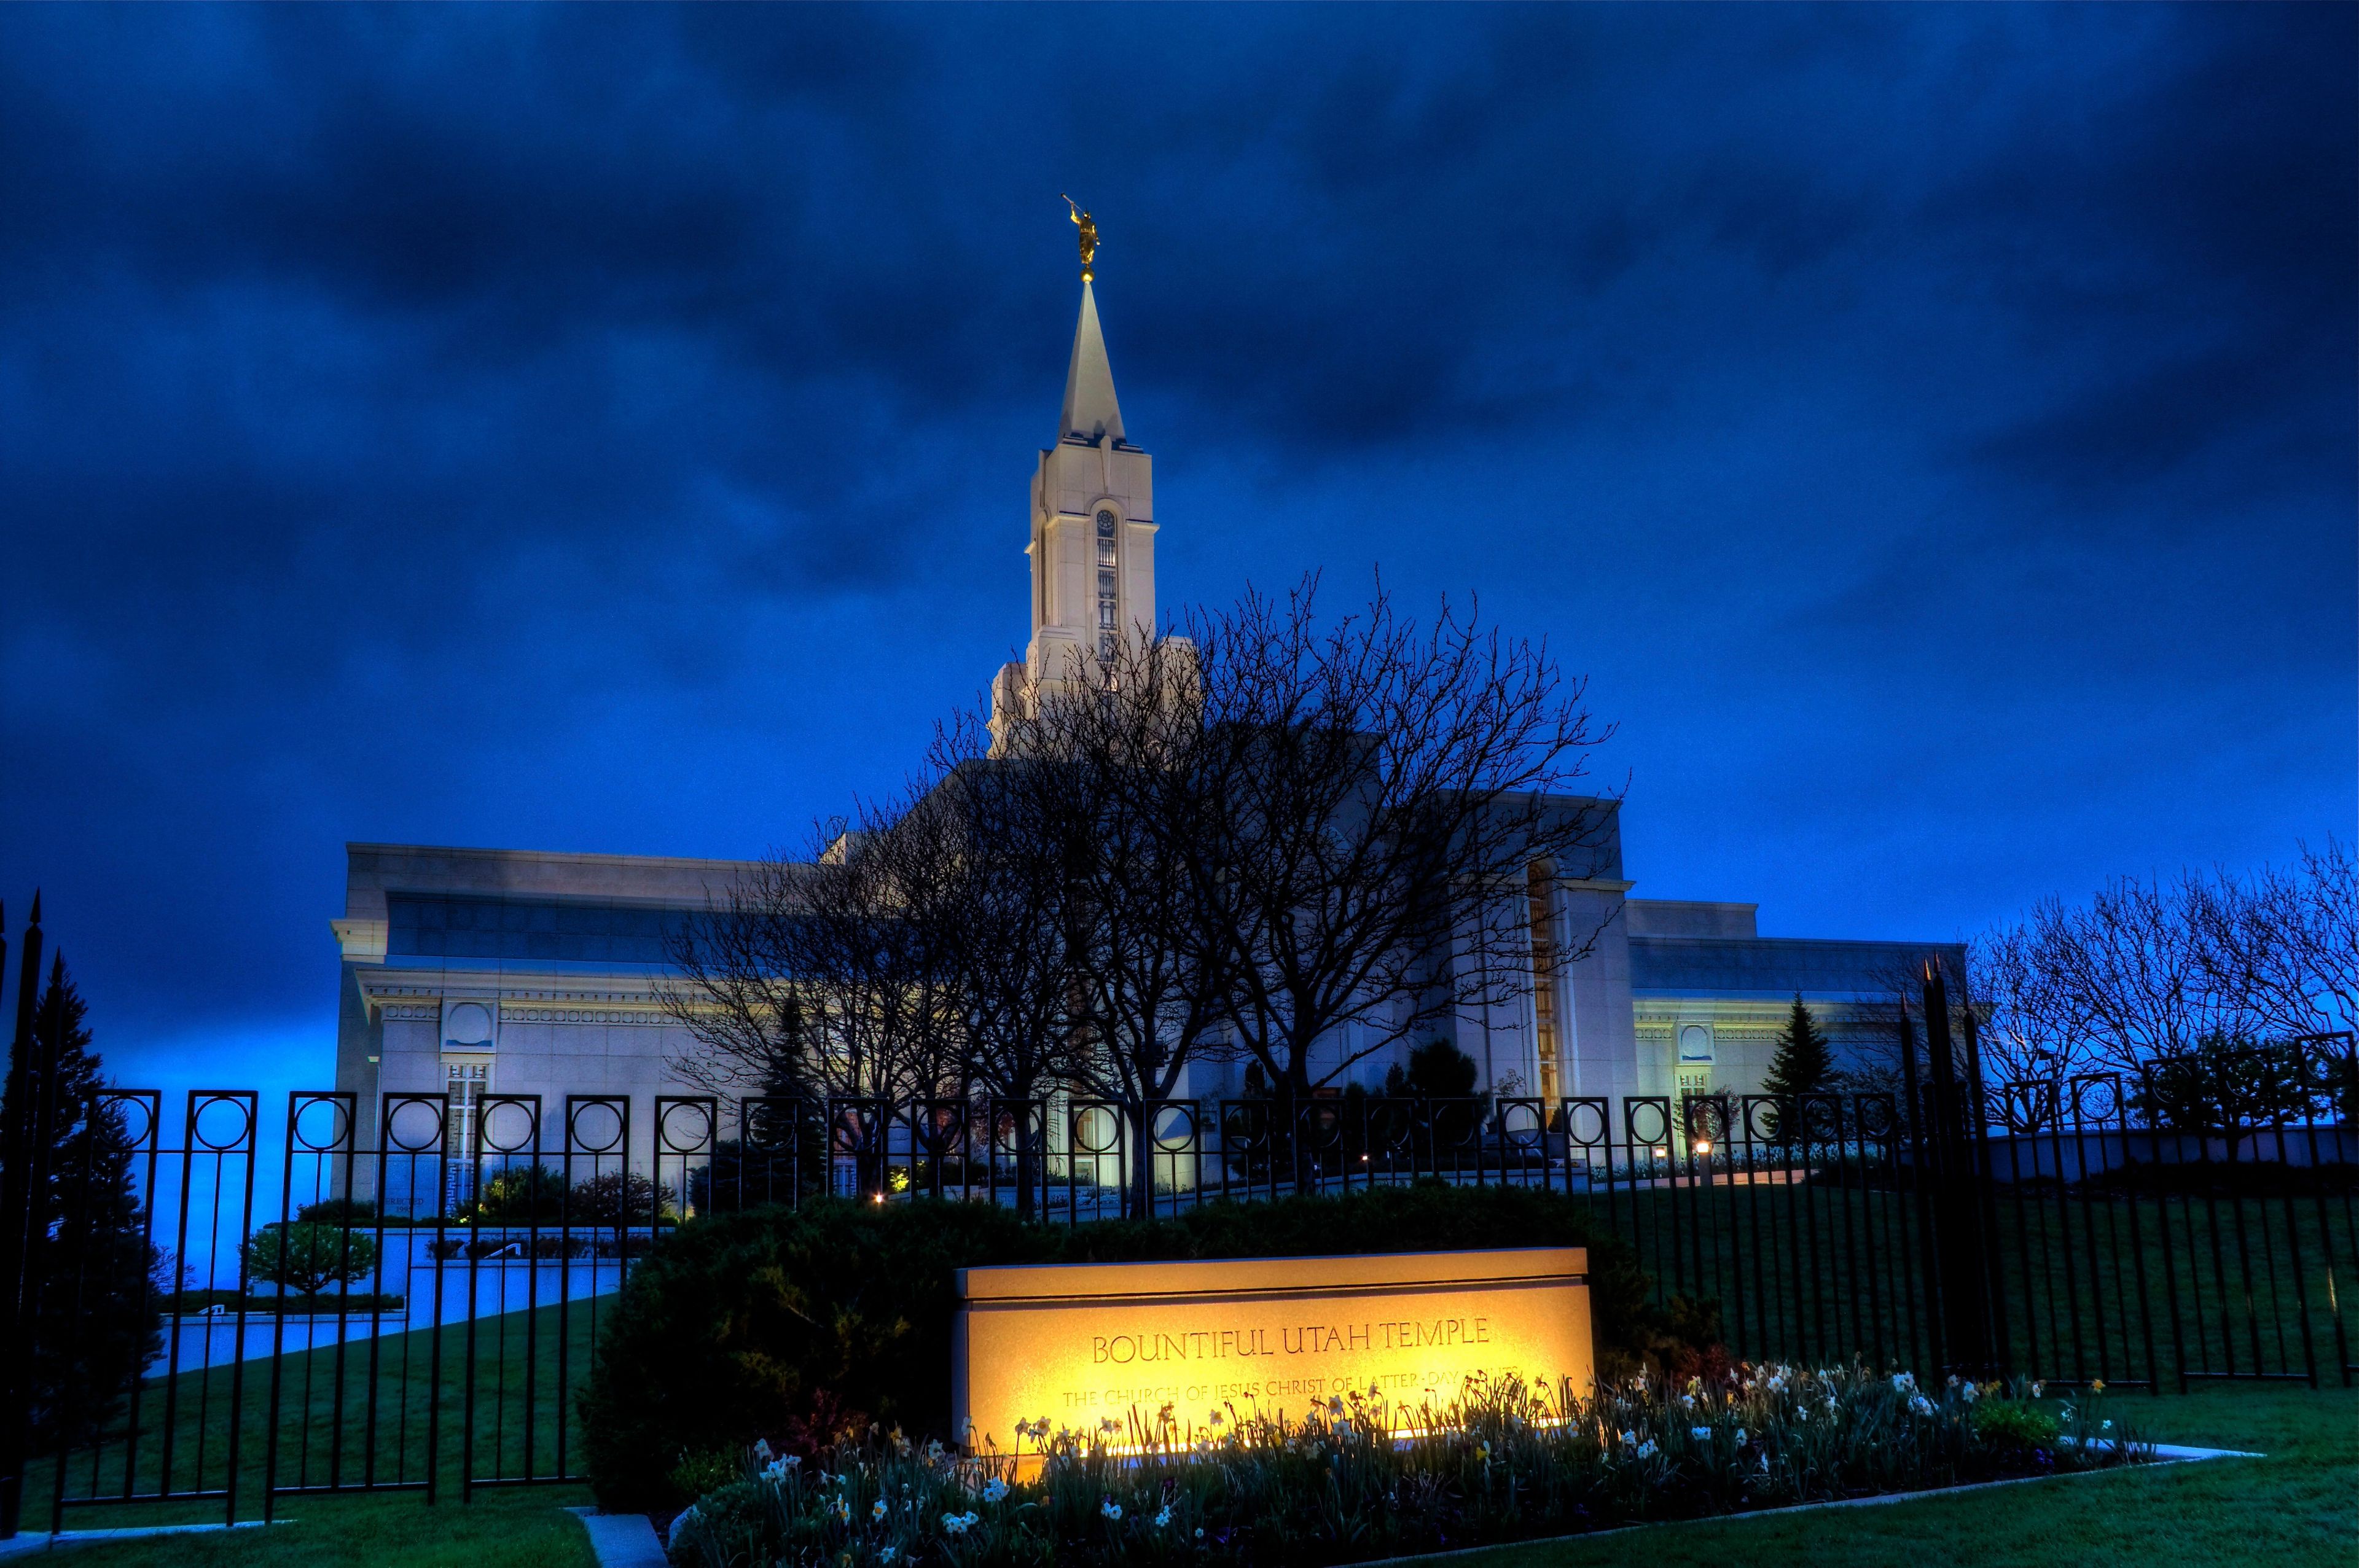 An exterior view of the Bountiful Utah Temple lit up at night.  